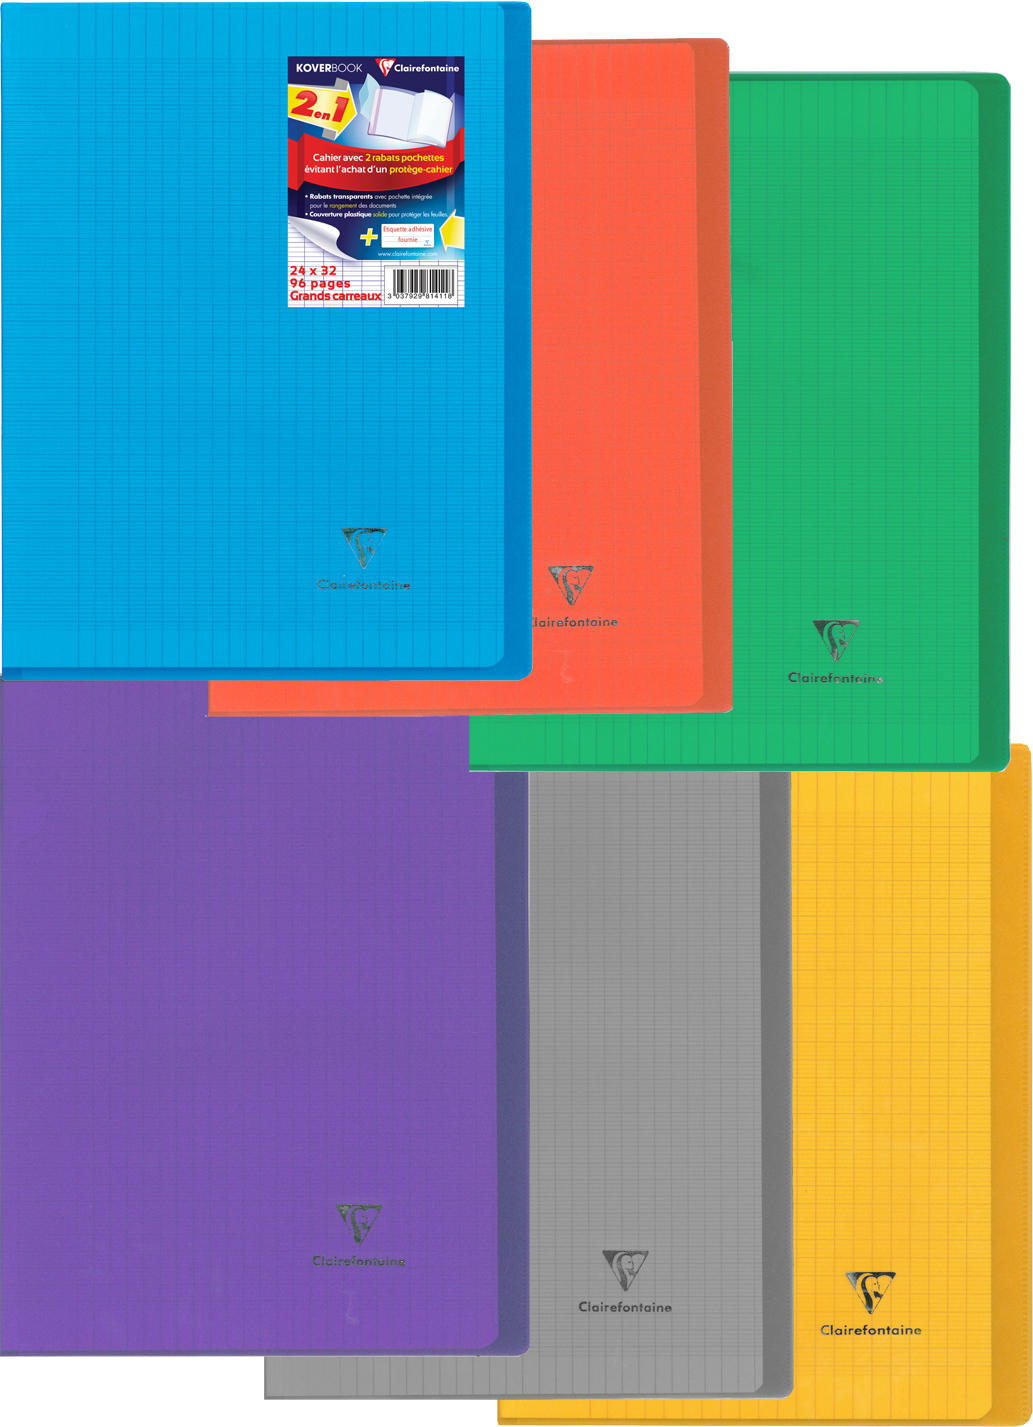 CLAIREFONTAINE Kover Book Cahier 24x32cm 981401 seyes 48 feuilles